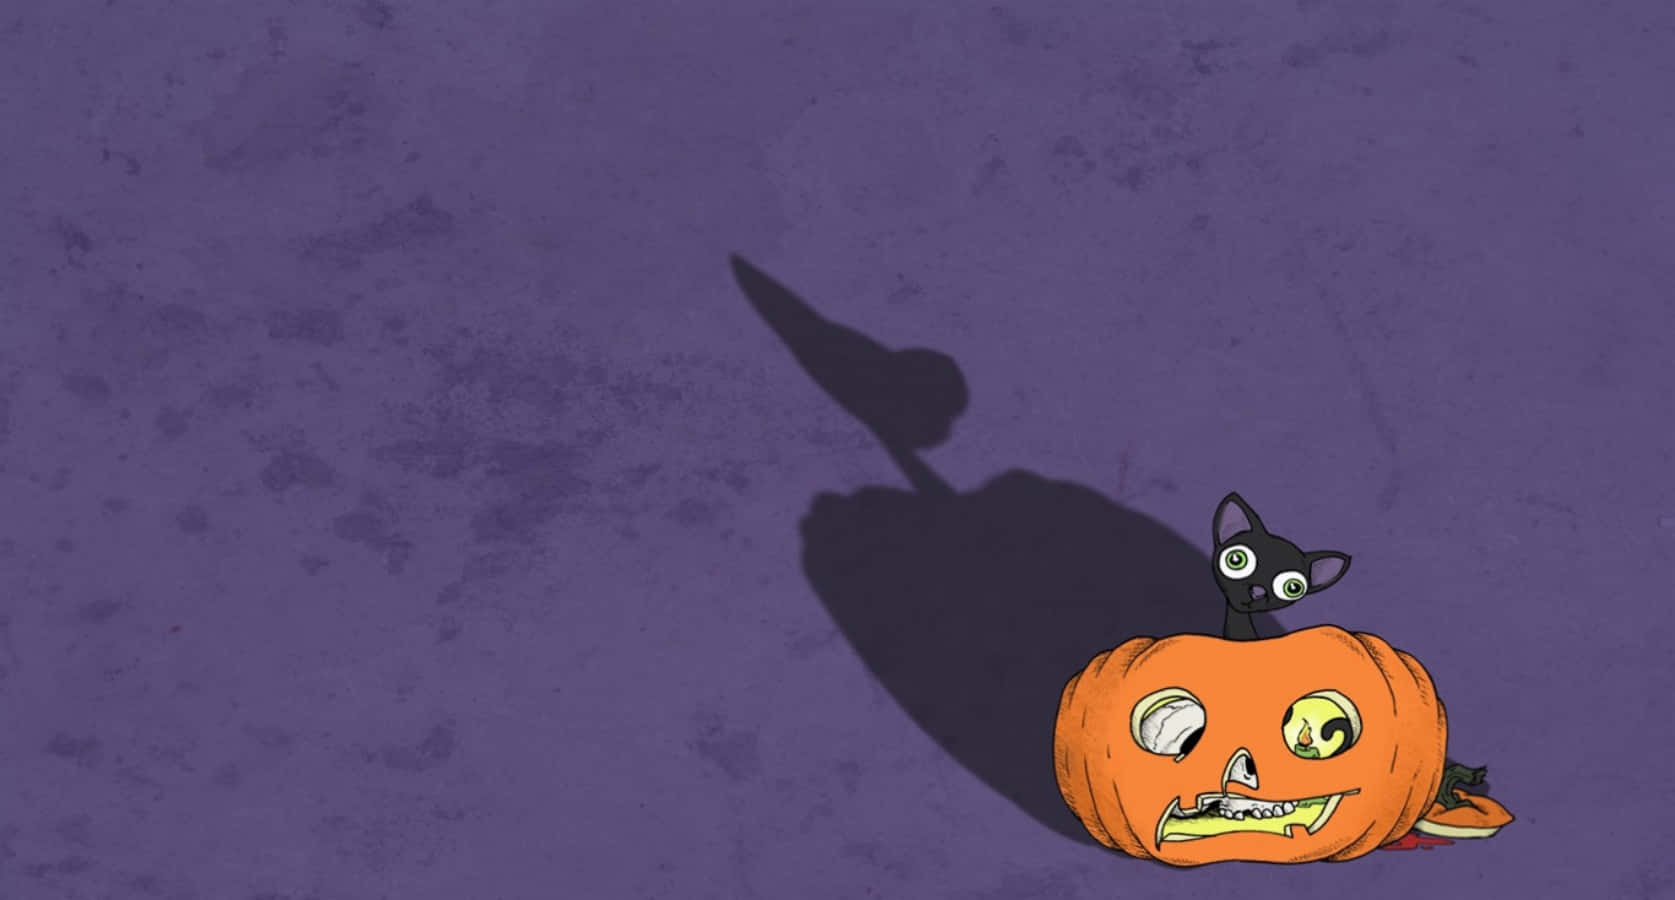 Get in the Spooky Spirit with Our Halloween Cat!